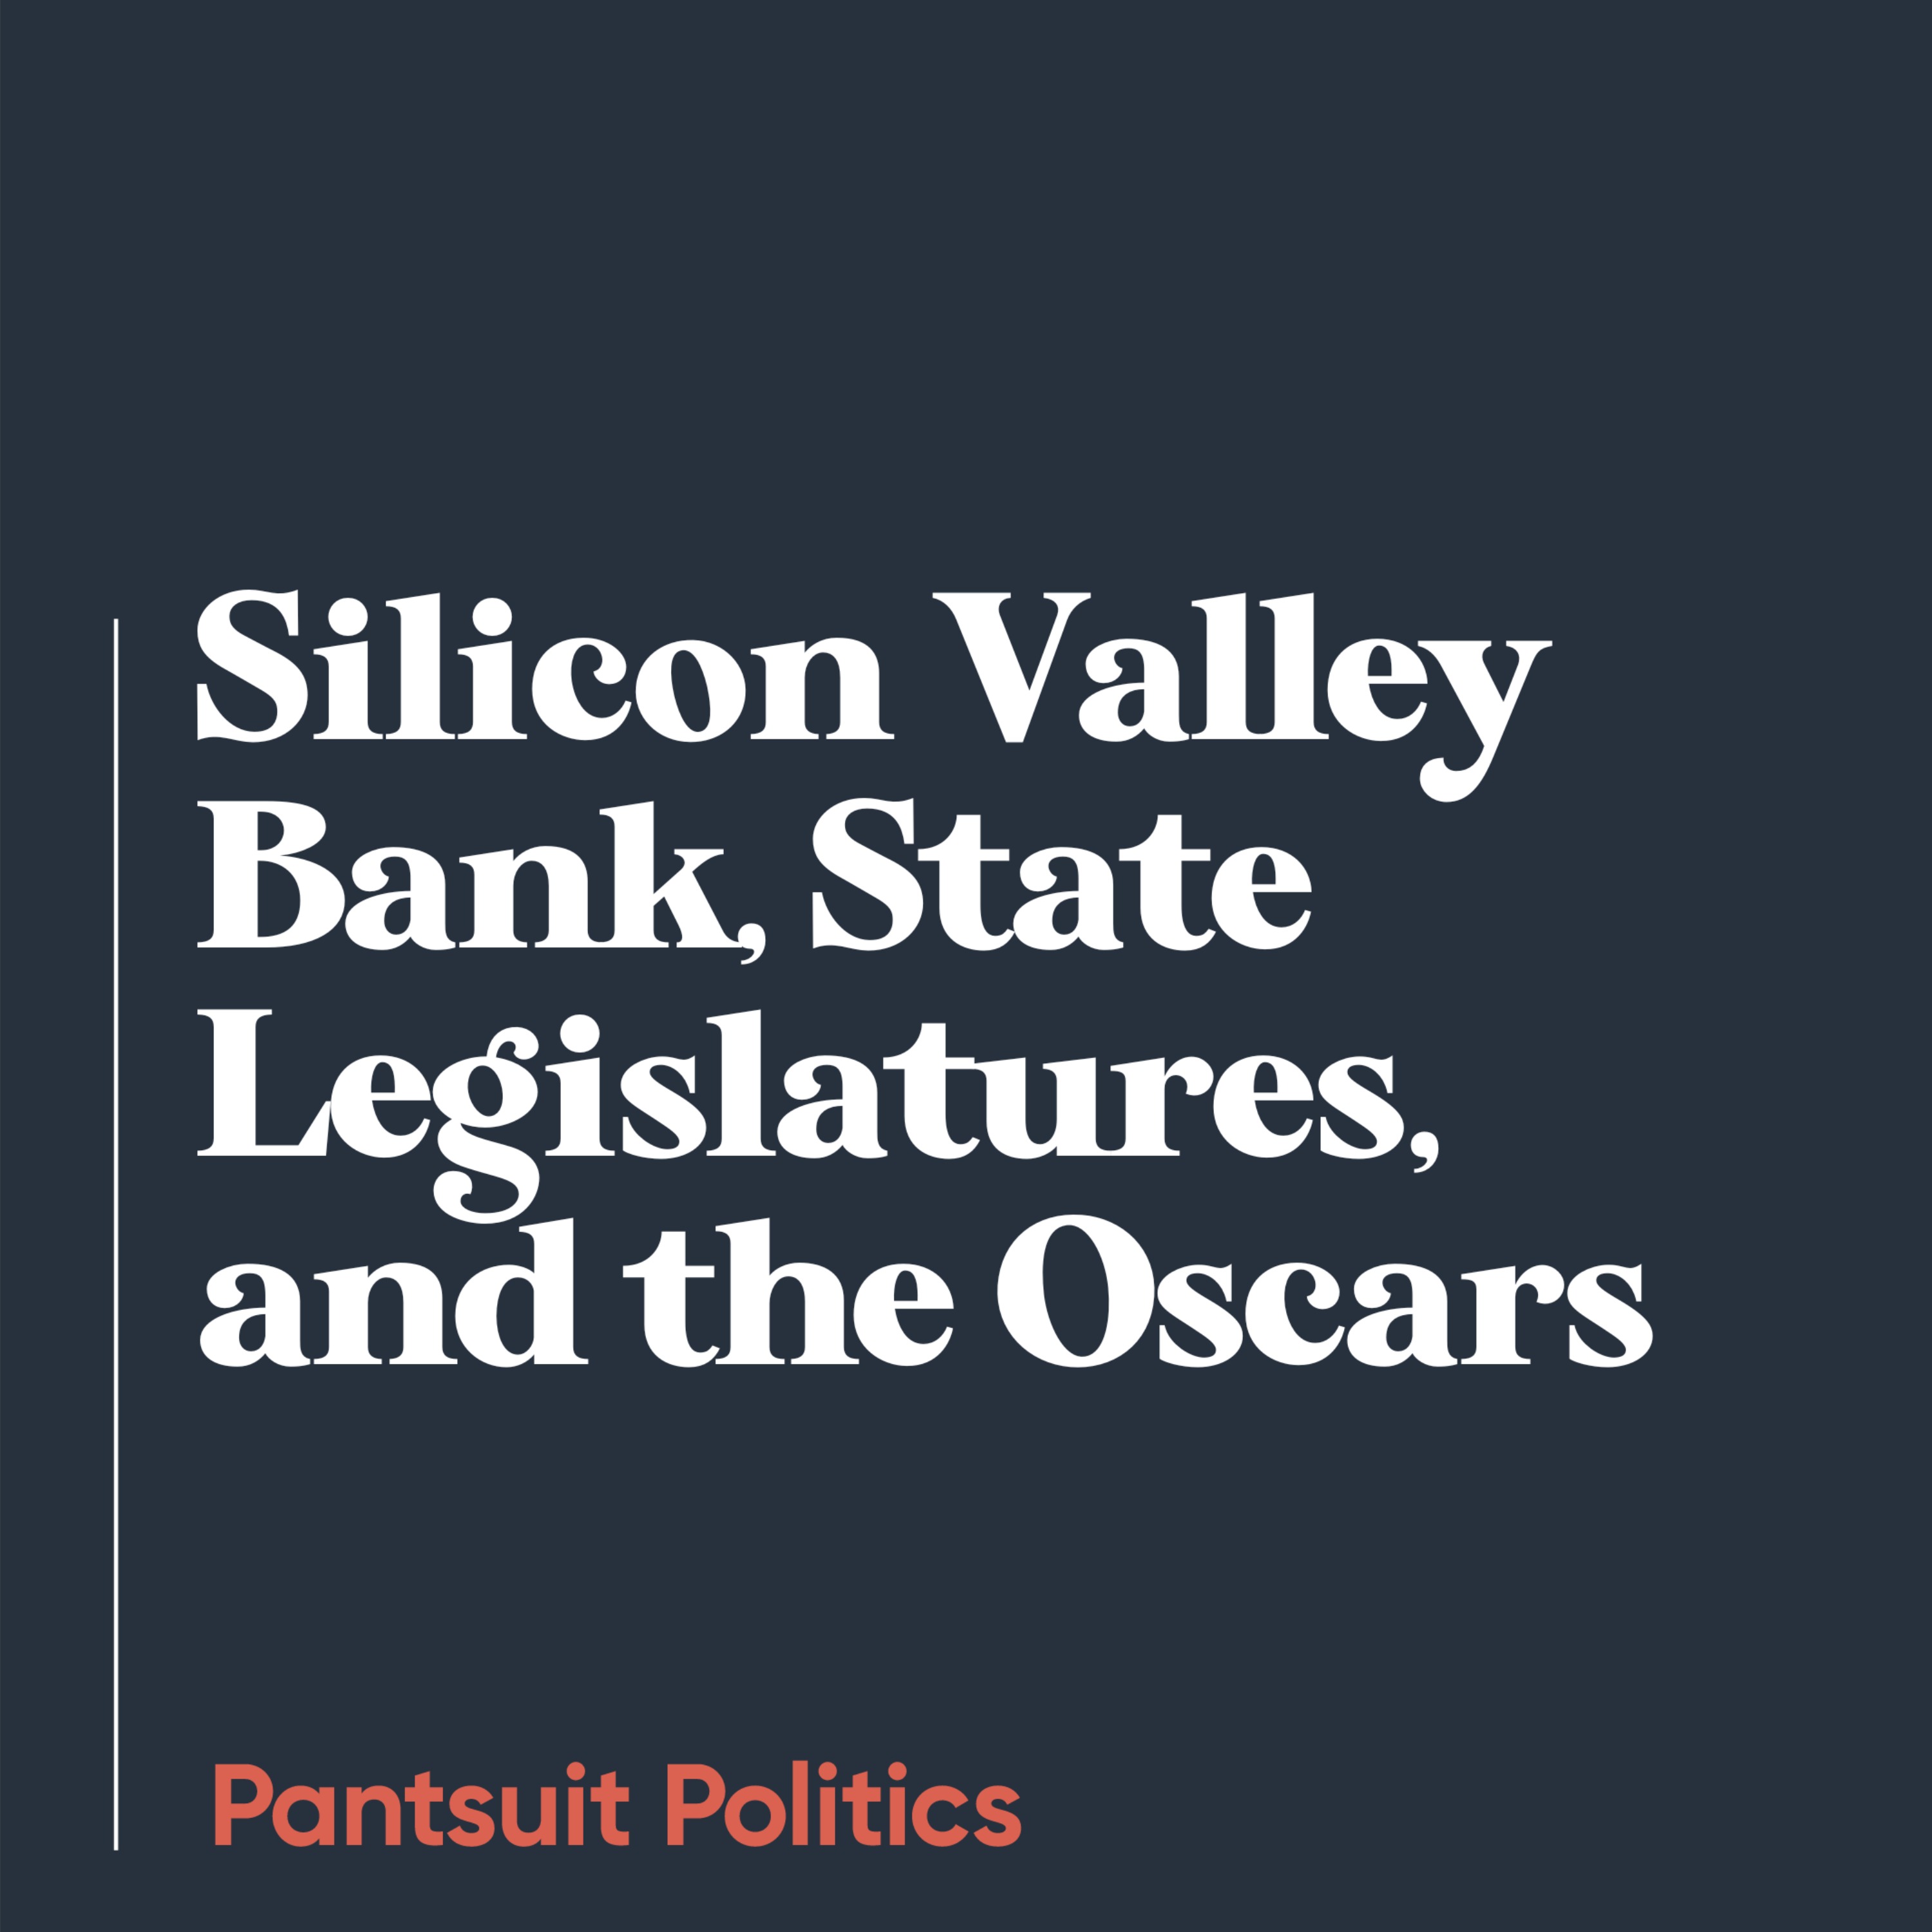 Silicon Valley Bank, State Legislatures, and the Oscars